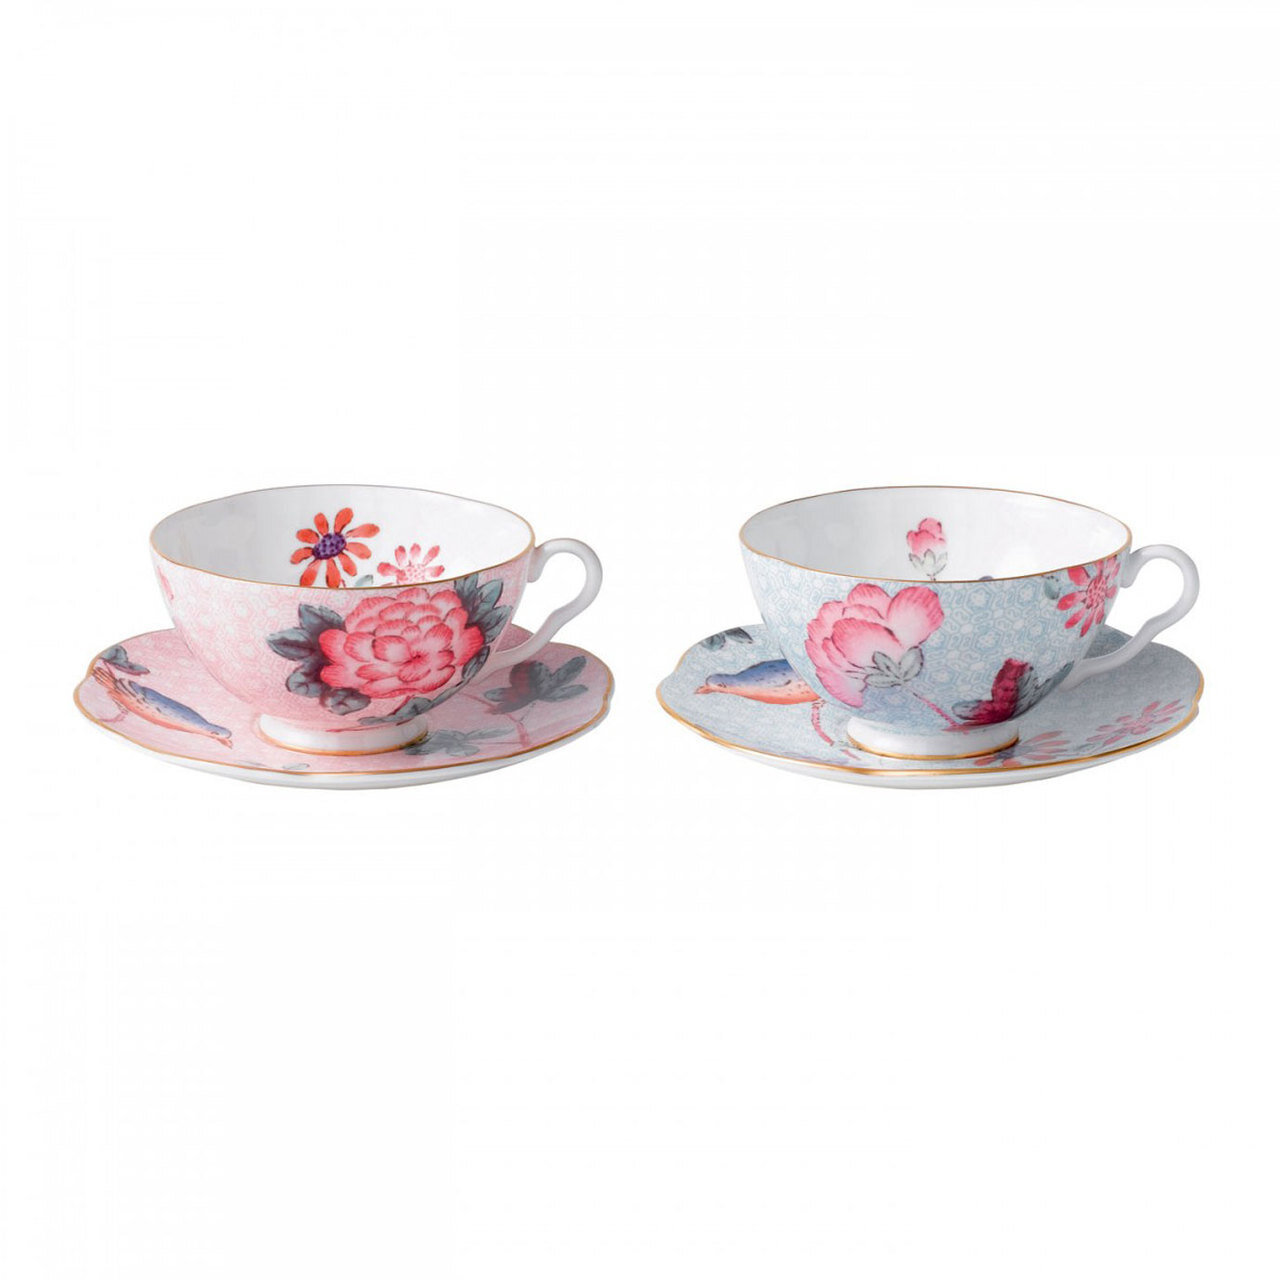 Wedgwood Cuckoo Teacup and Saucer Set of Two Pink and Blue